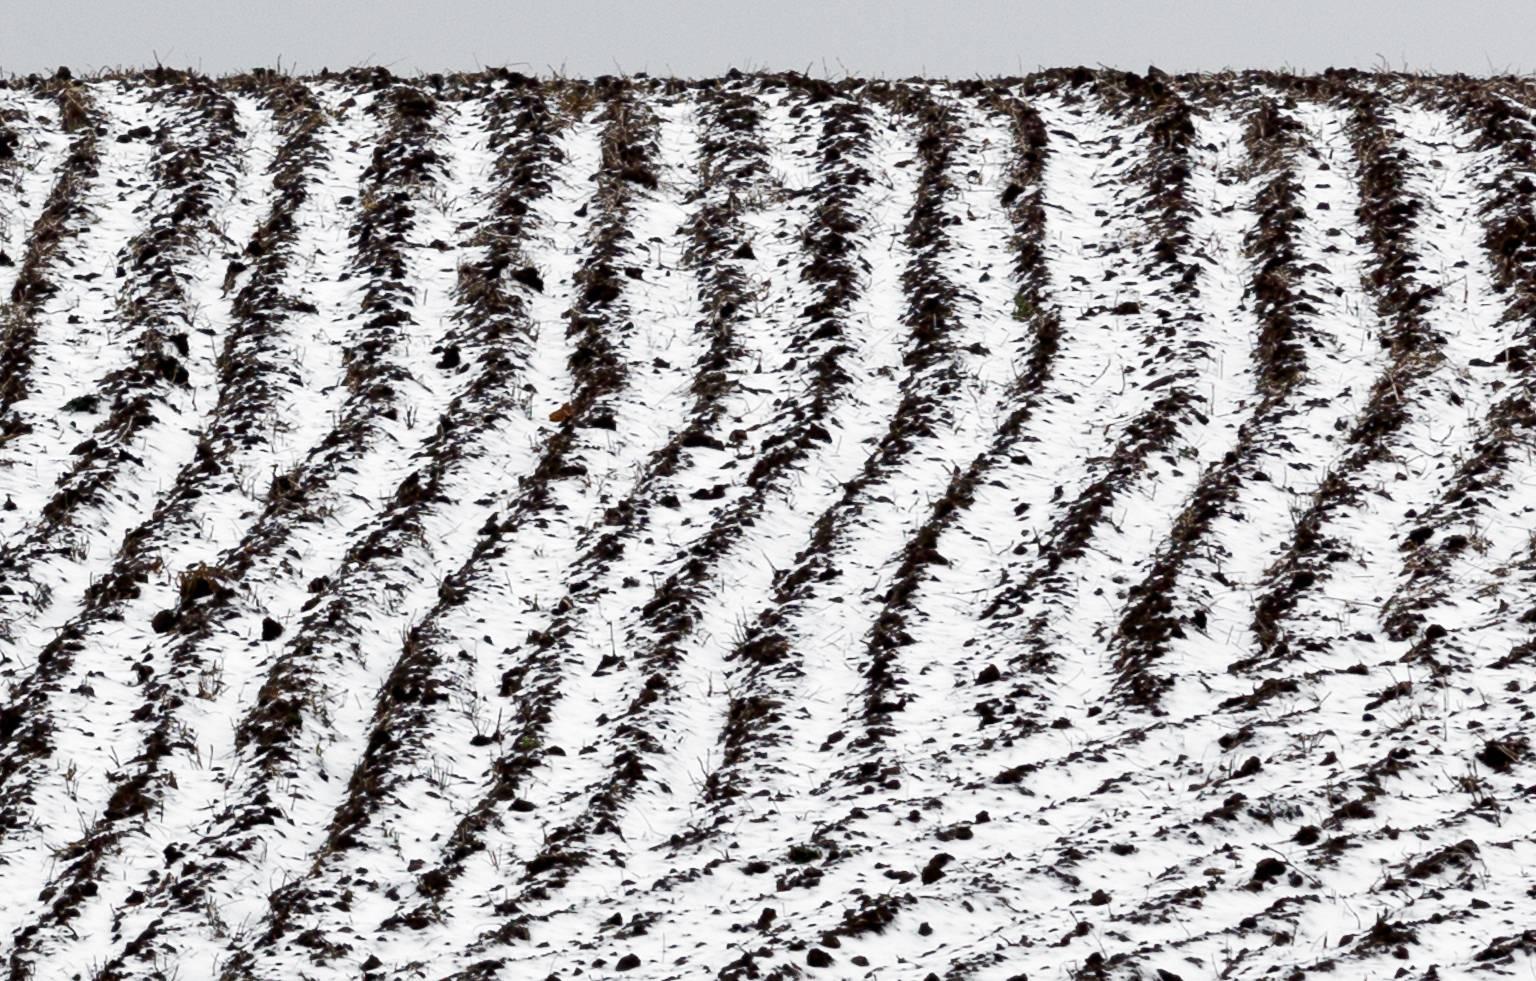 Ploughed Field No. 3 - Photograph by Chris Thomaidis